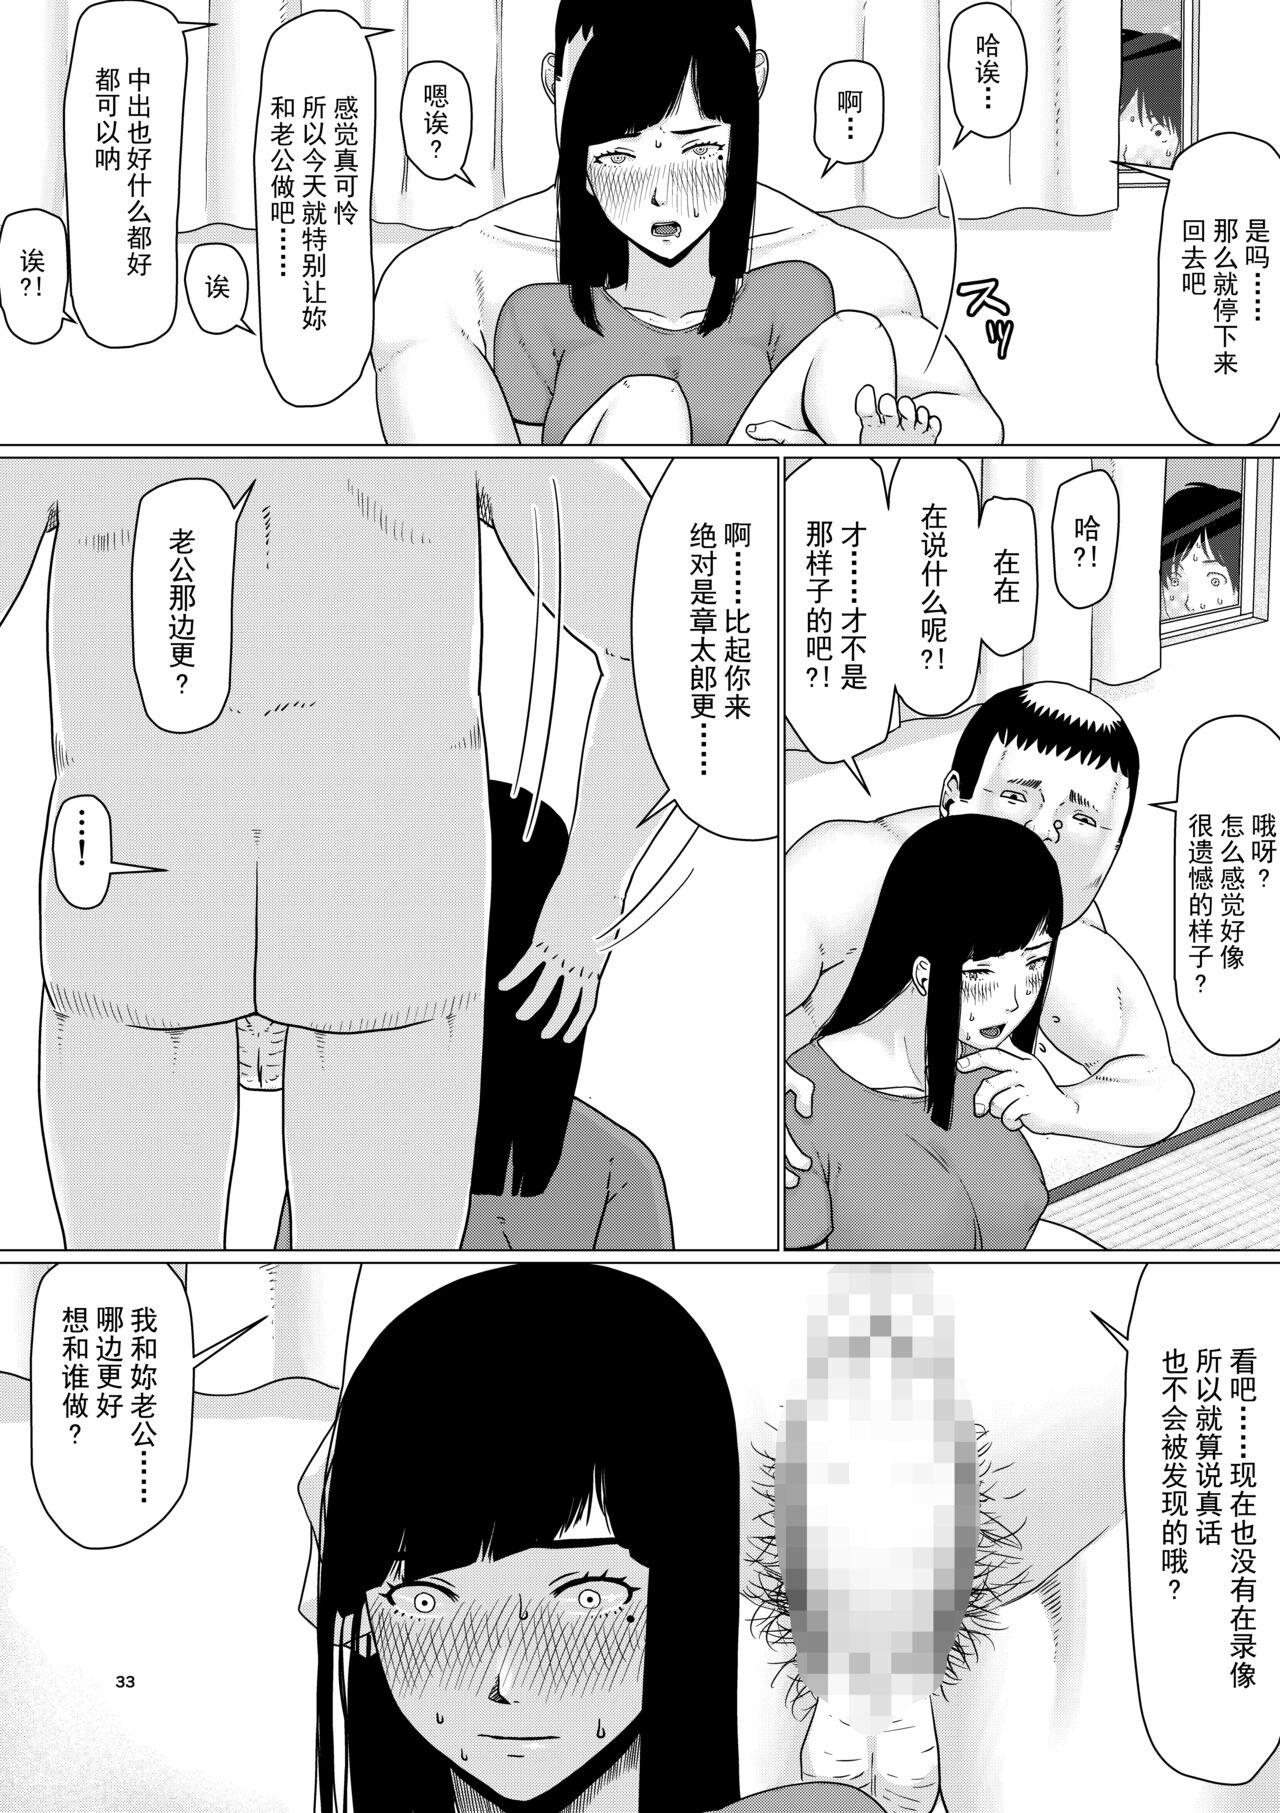 (Dōjinshi) Chieri can't lose!3 -Perverted toilet wife who fertilizes anyone's sperm with her husband's approval- Volume 1 (Original) [Chinese][超勇漢化組] 34